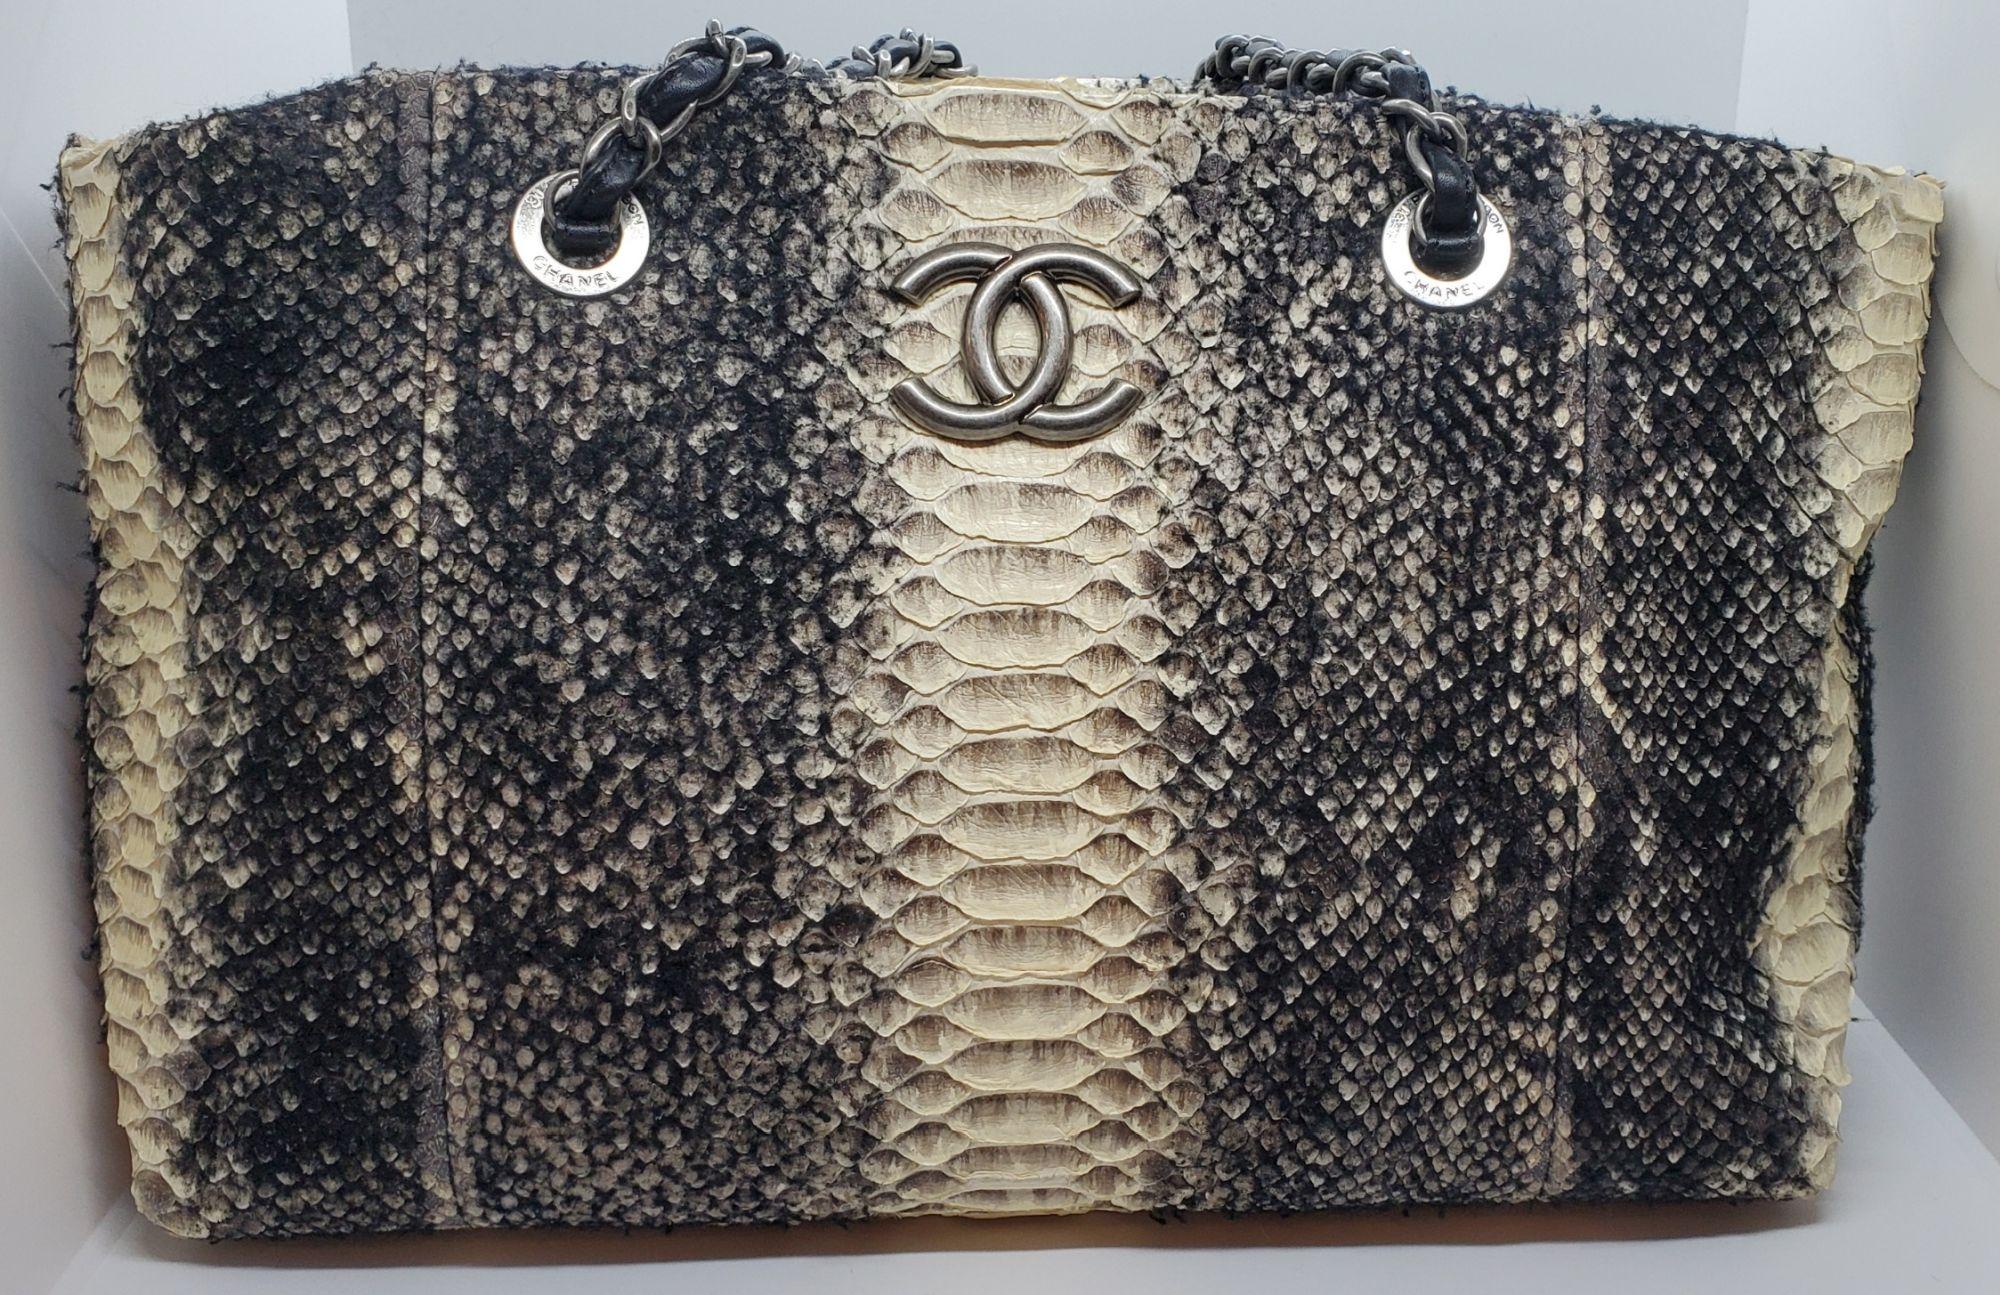 Rare CHANEL Python Wooled Beige Black Chain Tote Bag Shopping Bag.
31 Rue Cambon Paris

Beautiful textured Chanel python skin handbag. The leather has been partially covered in wool. Black and white contrasting colors with grays. 
The Large CC metal